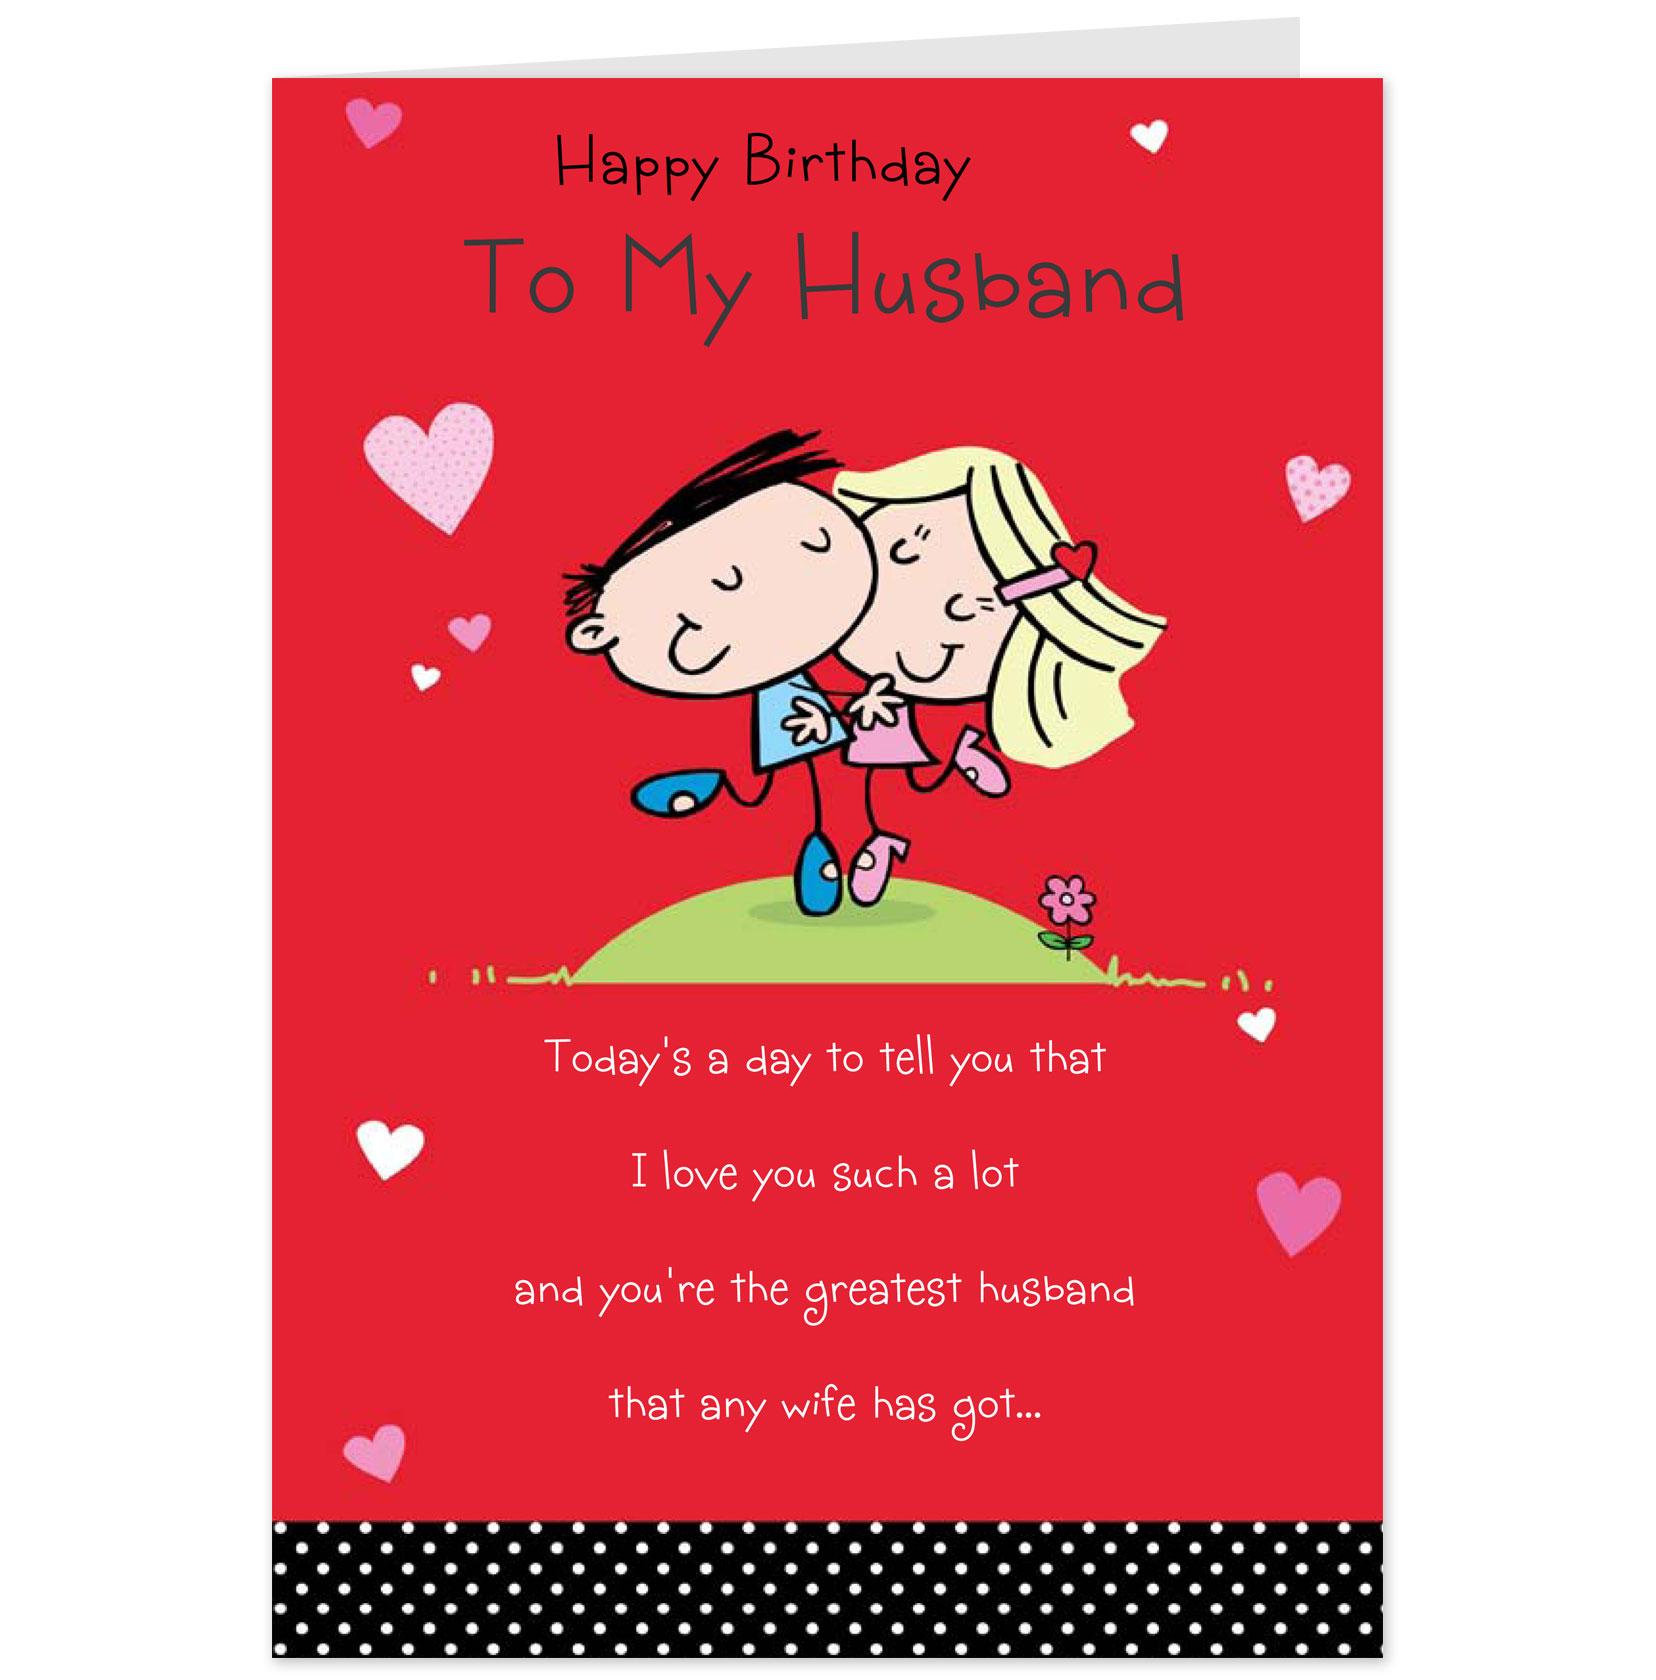 7-best-images-of-husband-birthday-greetings-printable-birthday-cards-husband-printable